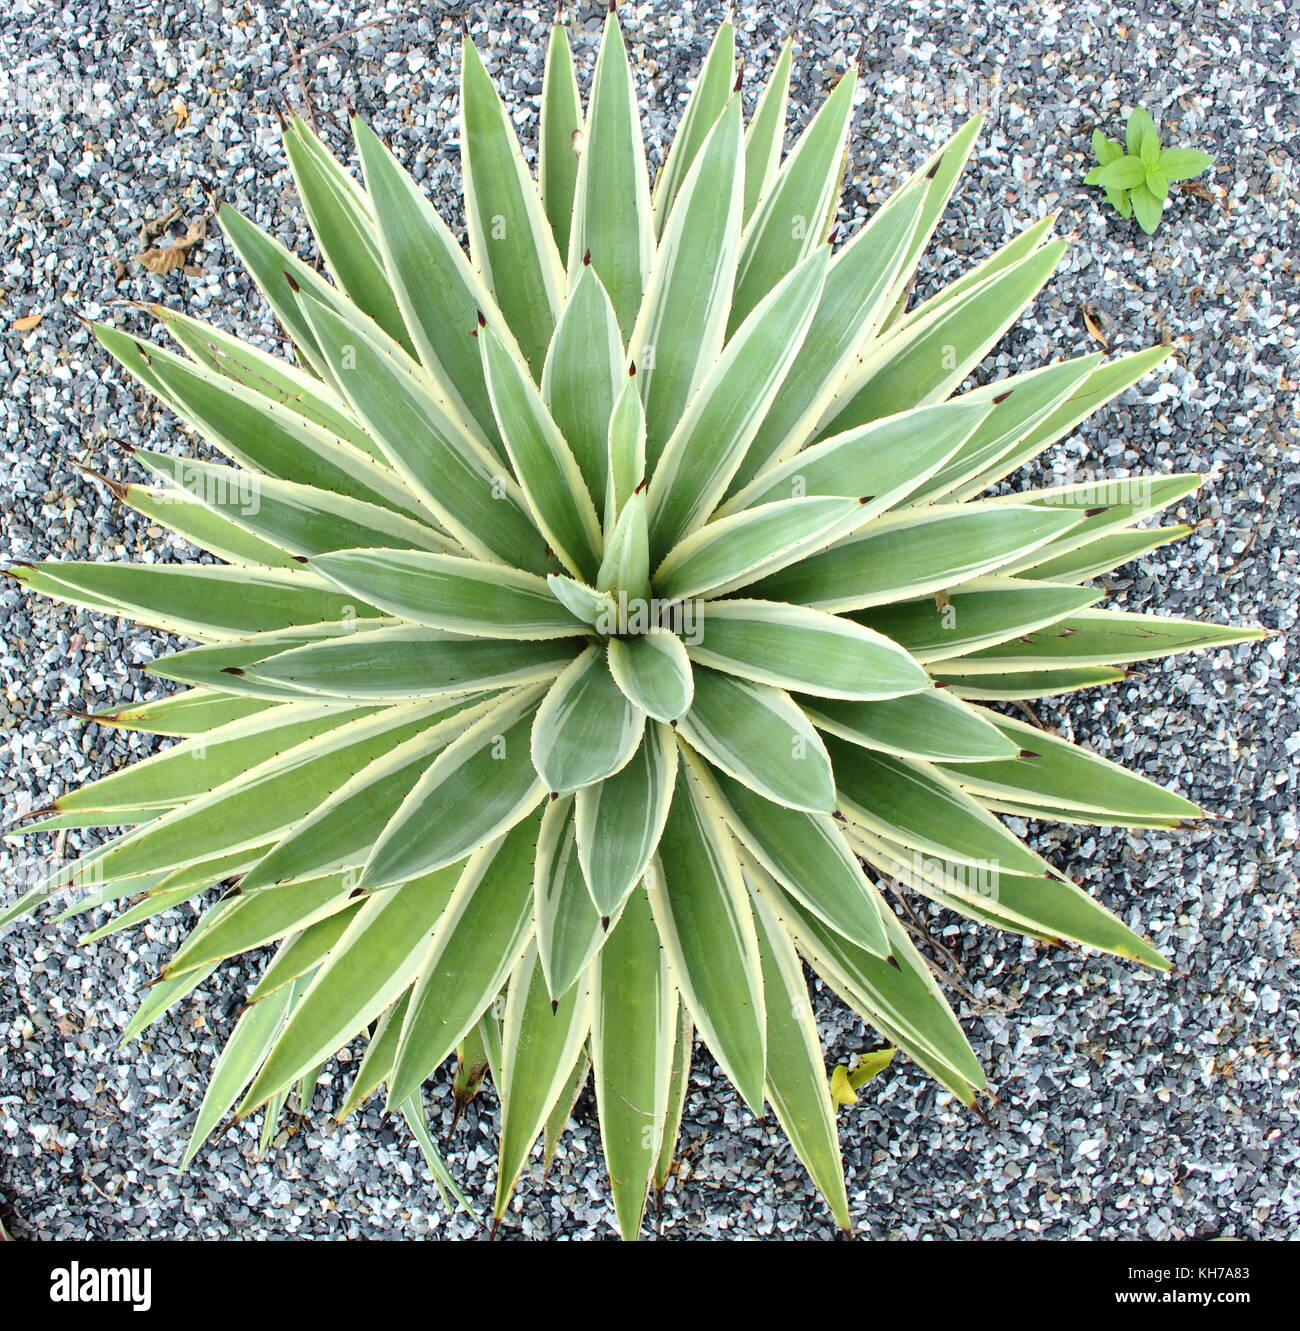 Top view of Agave in the garden with gravel floor. Stock Photo